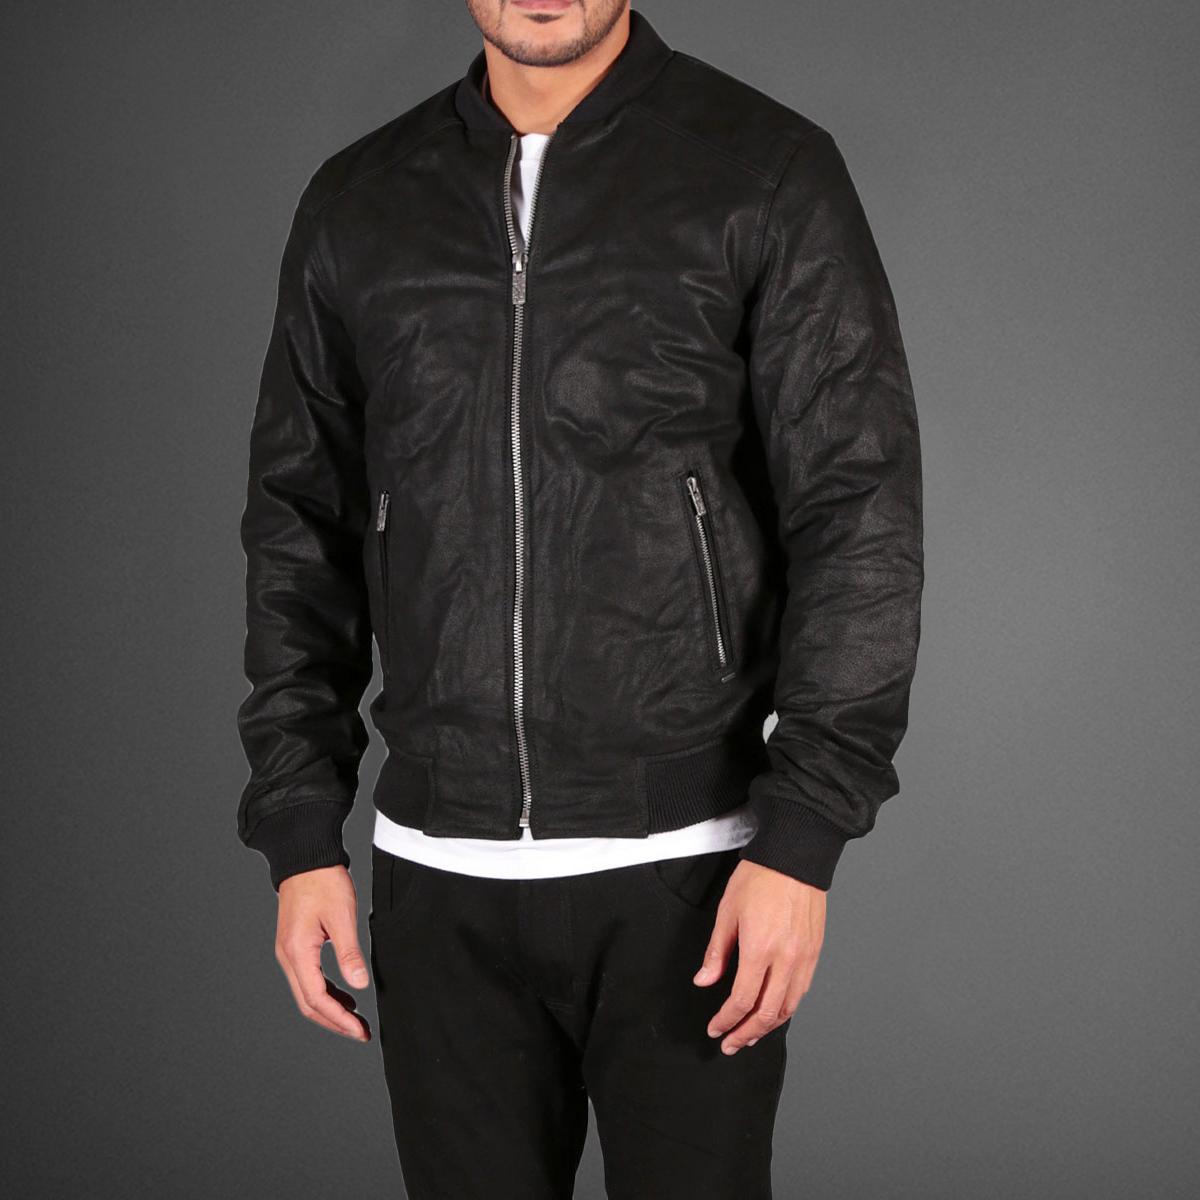 LeatherNXG -Online Store to Buy Leather clothes!!: Leather Bomber ...